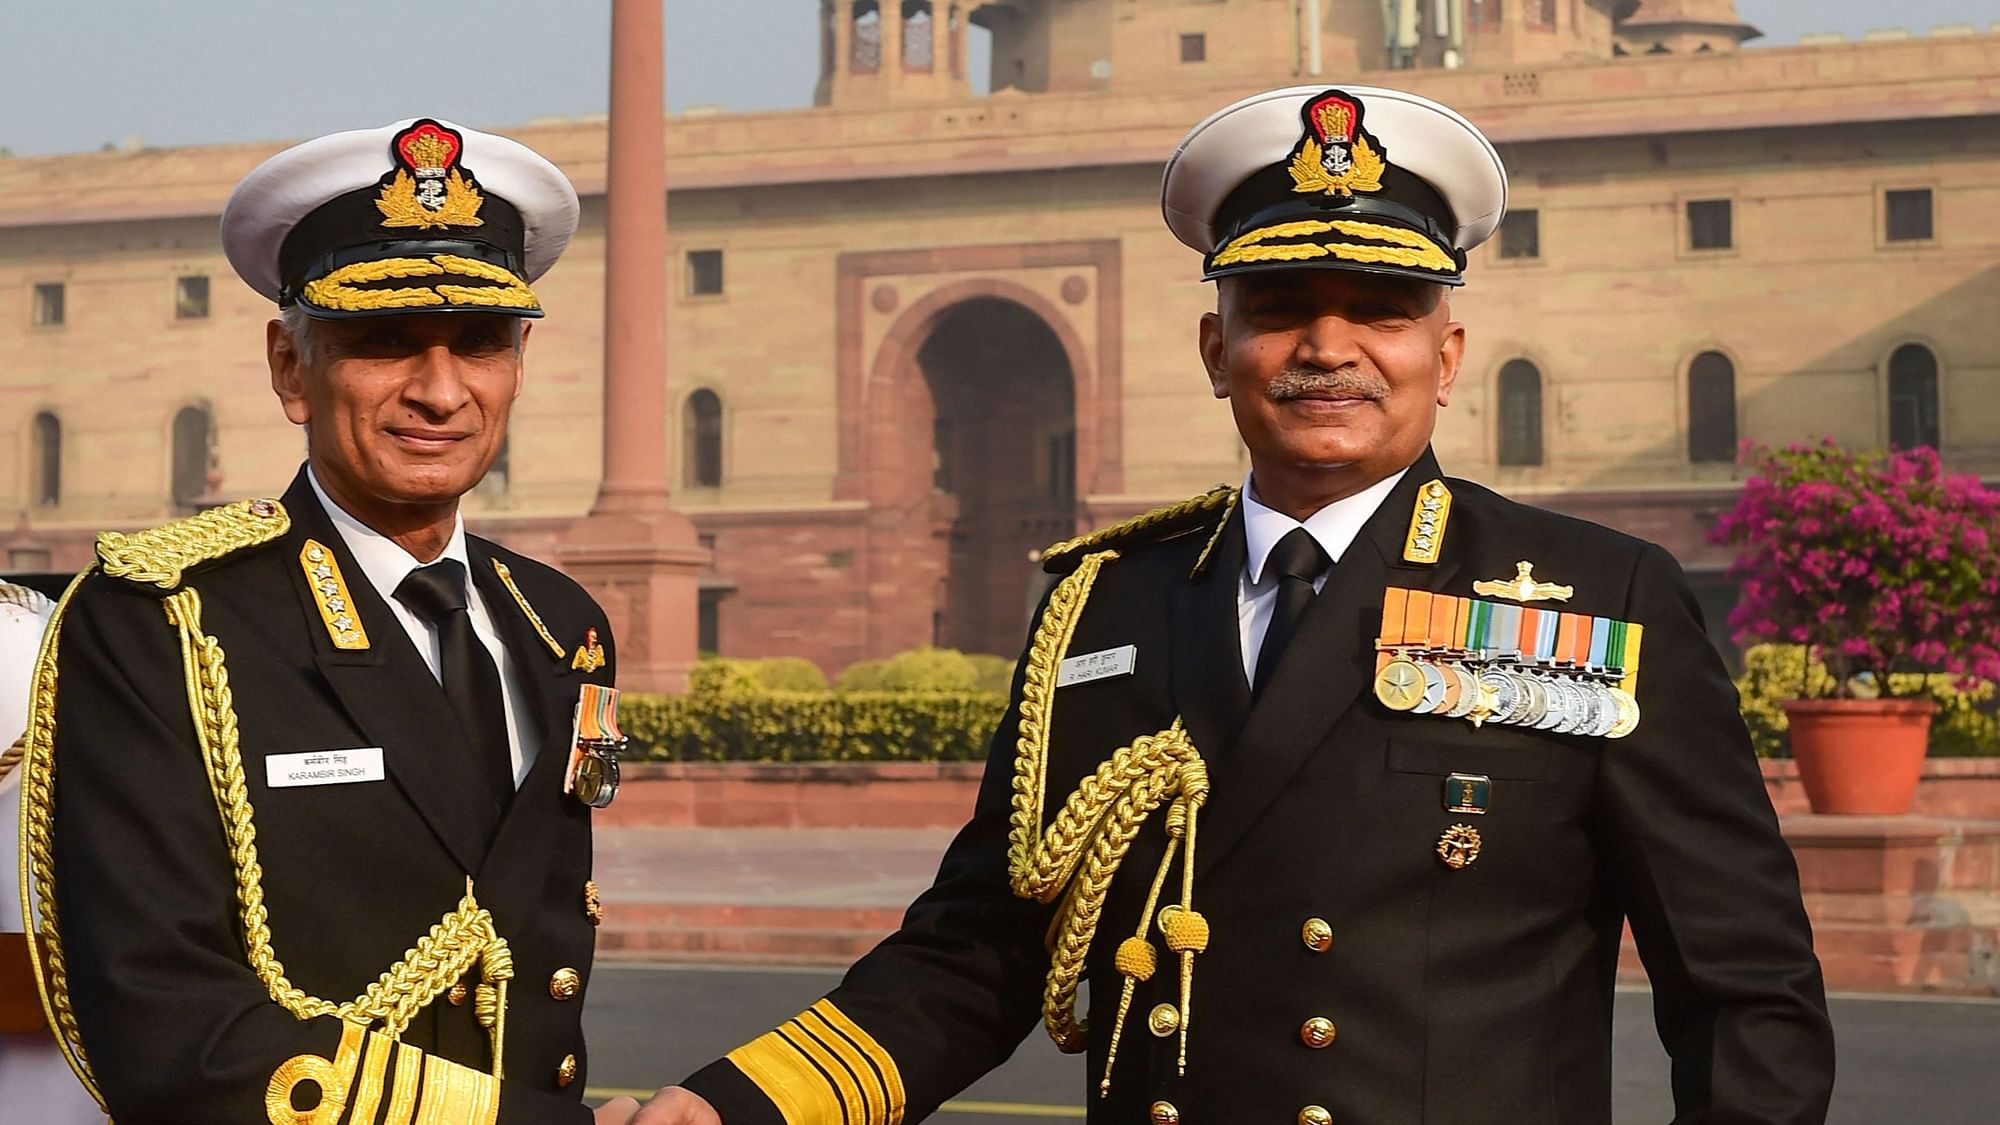 <div class="paragraphs"><p>The newly appointed Naval Chief Admiral R Hari Kumar (Right) being welcomed by the outgoing Naval Chief Admiral Karambir Singh (Left) at South Block, in New Delhi, Tuesday, 30 November.</p></div>